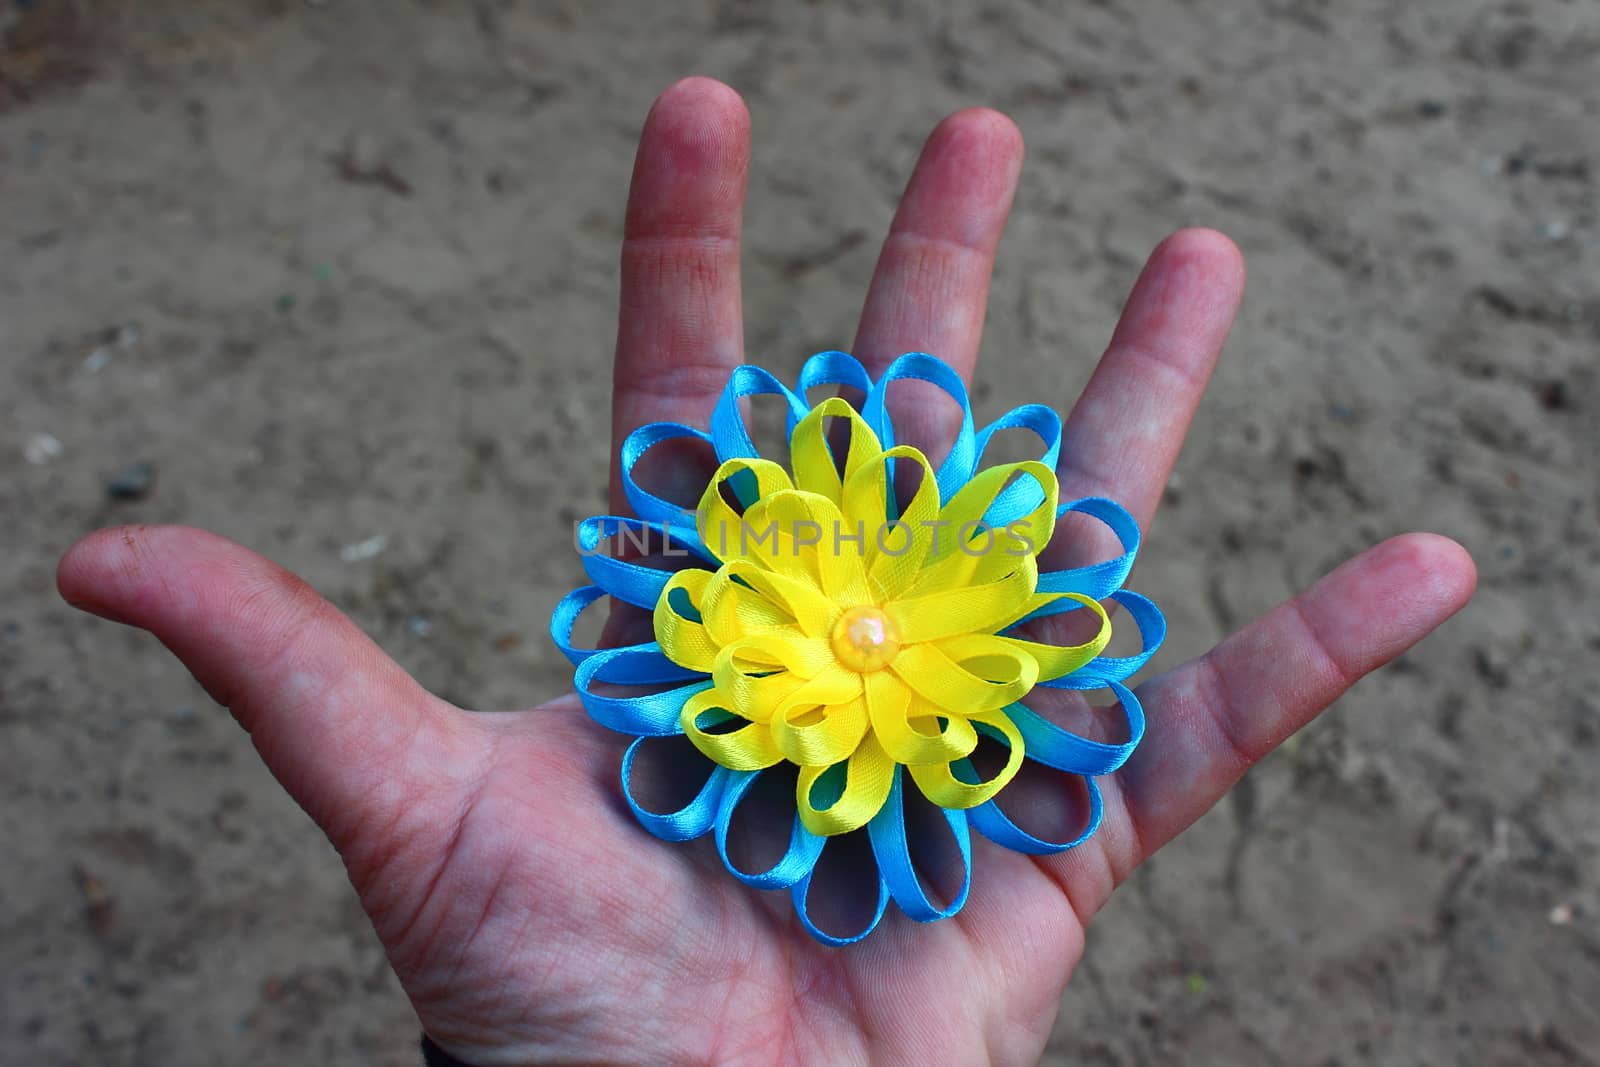 In his hand is an open flower, made ??of blue and yellow